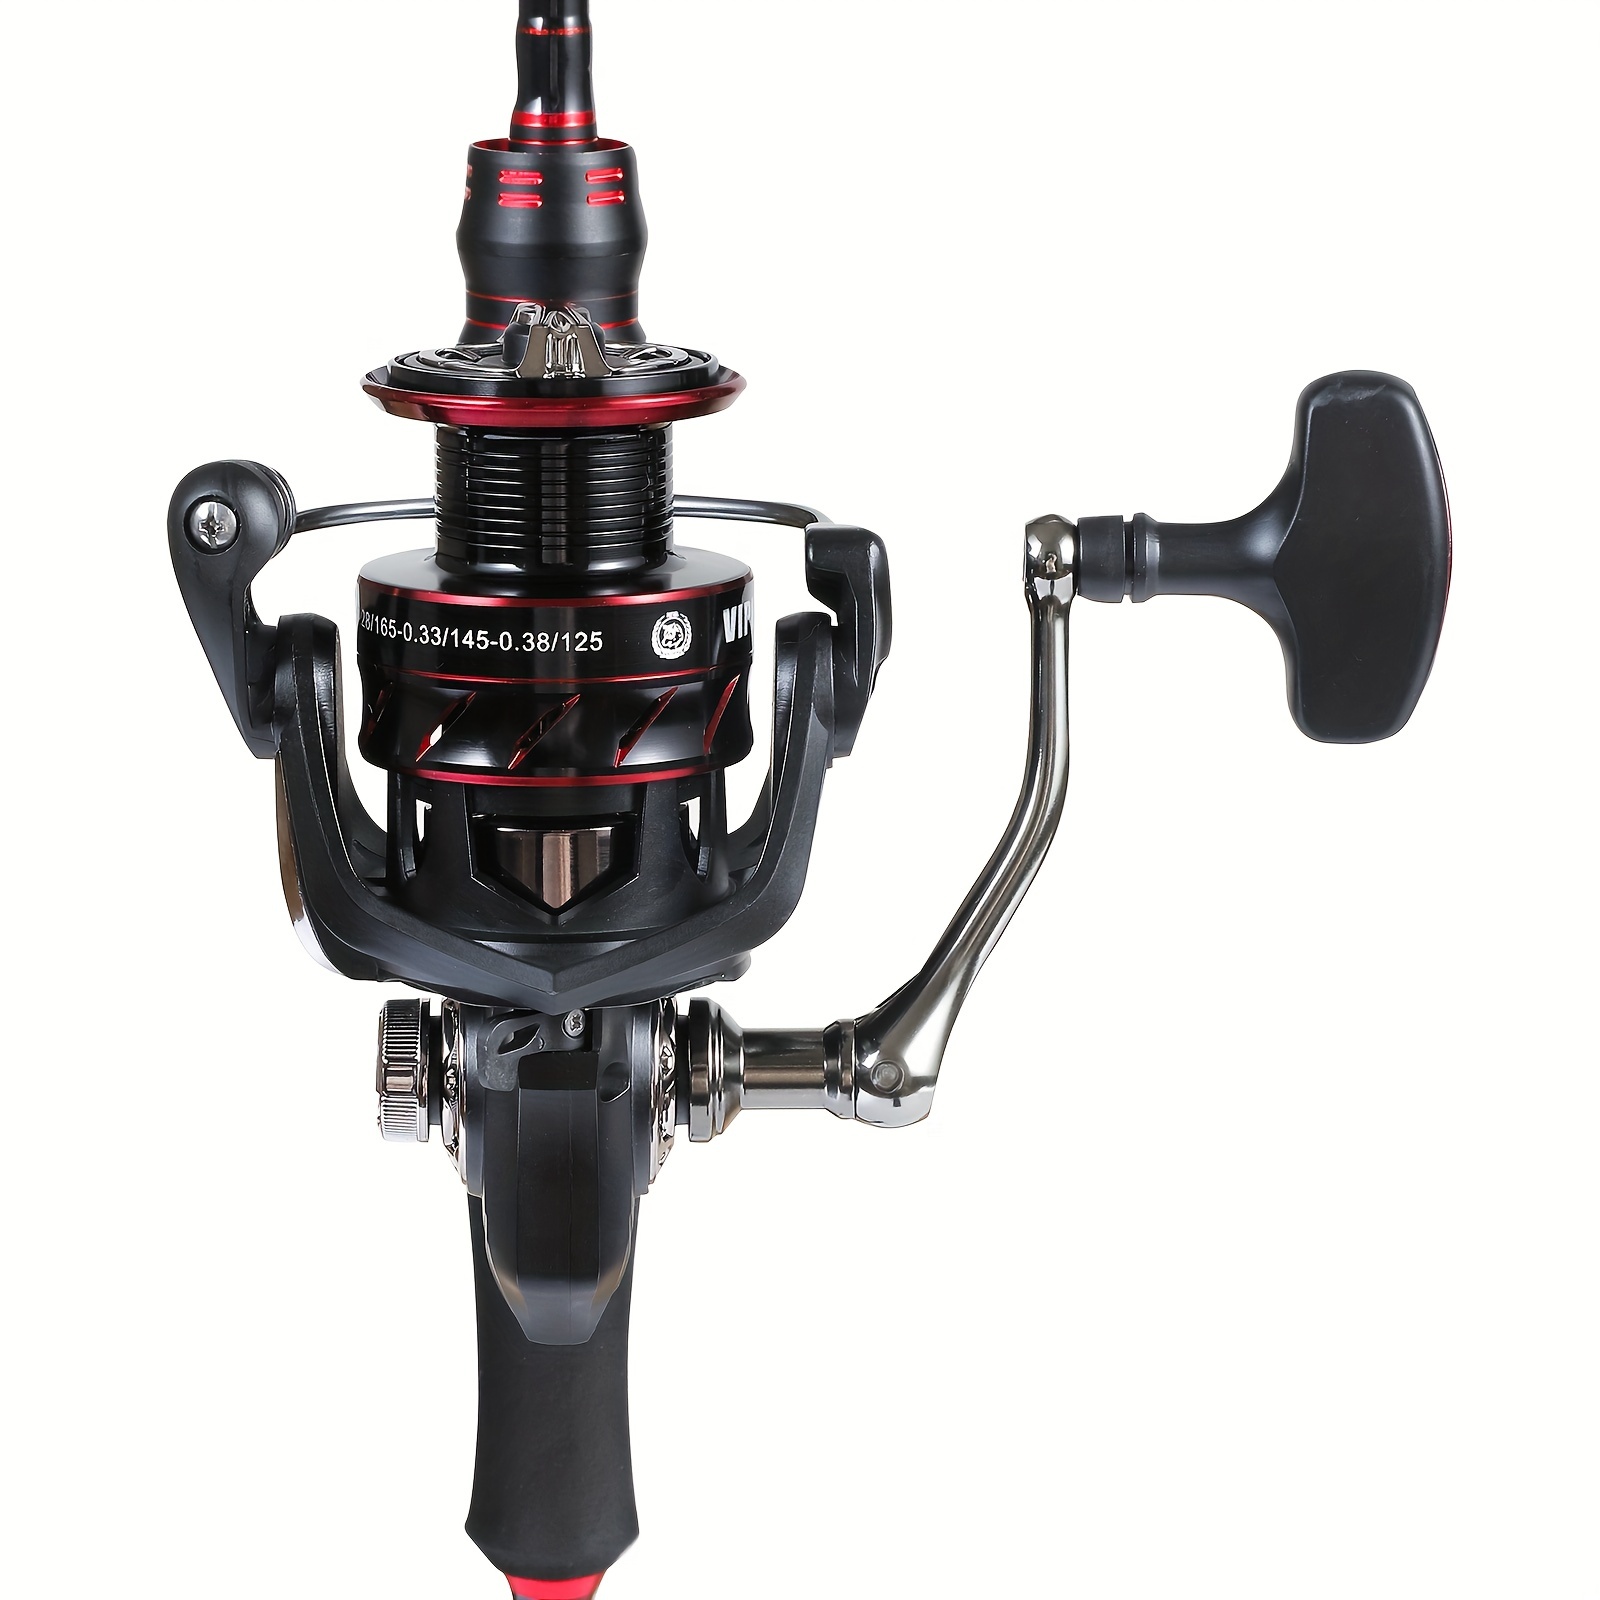 Metal Fishing Spinning Reel, 3000-4000, For Left And Right Hand, Fishing  Accessories For Freshwater Saltwater Fishing